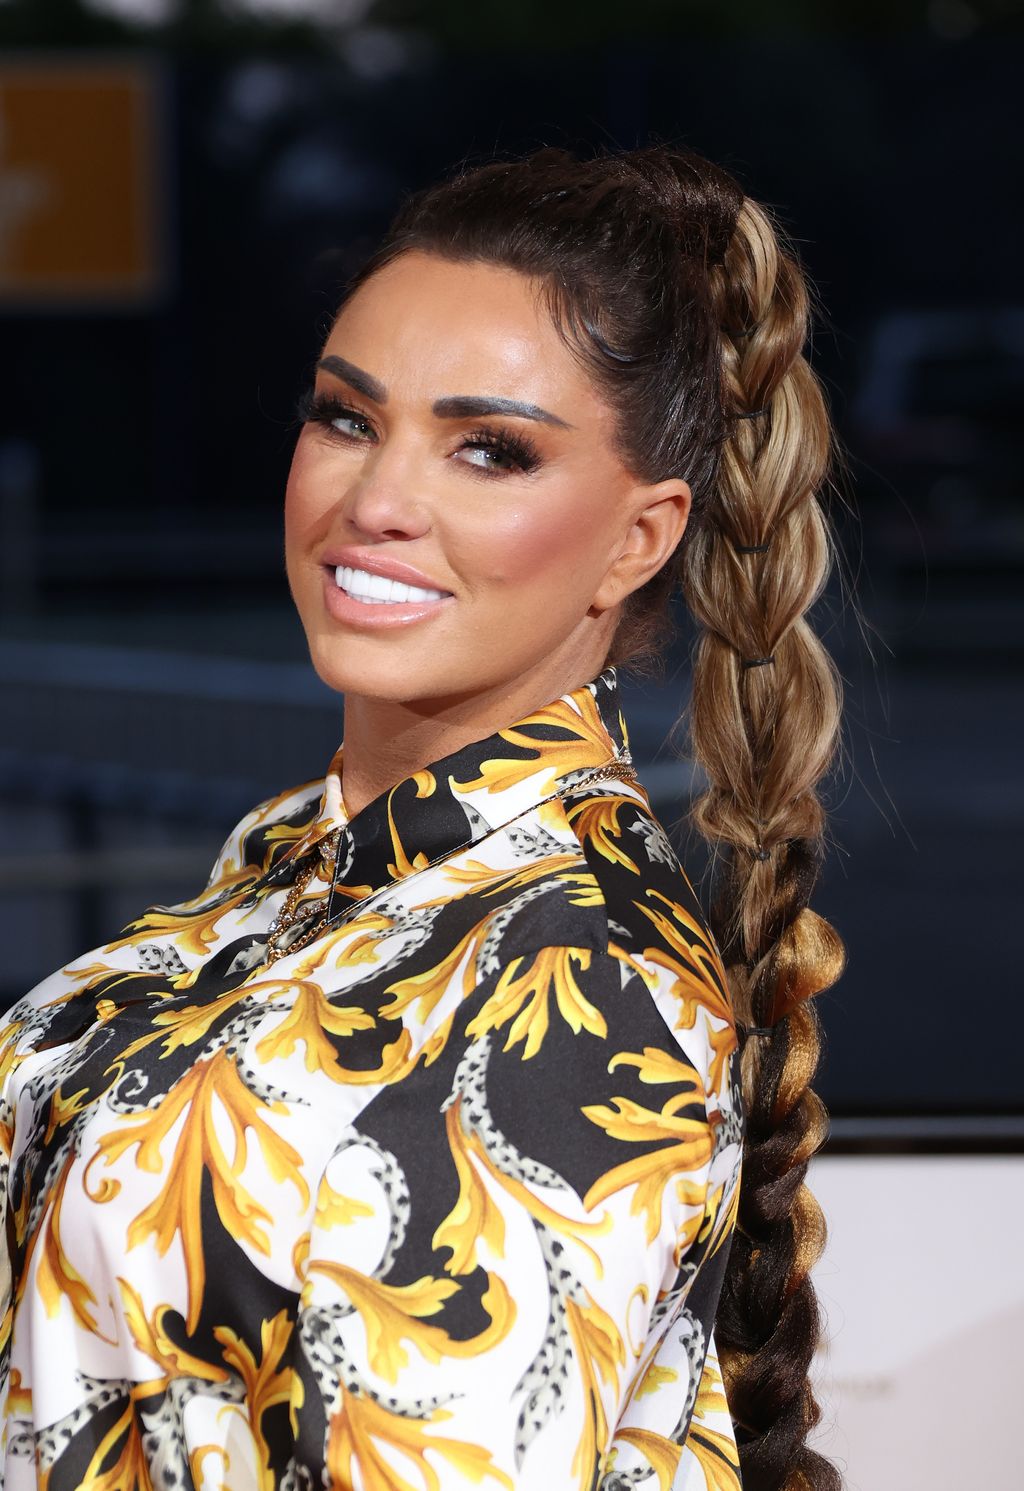 Katie Prices smiling for a photo at a red carpet event